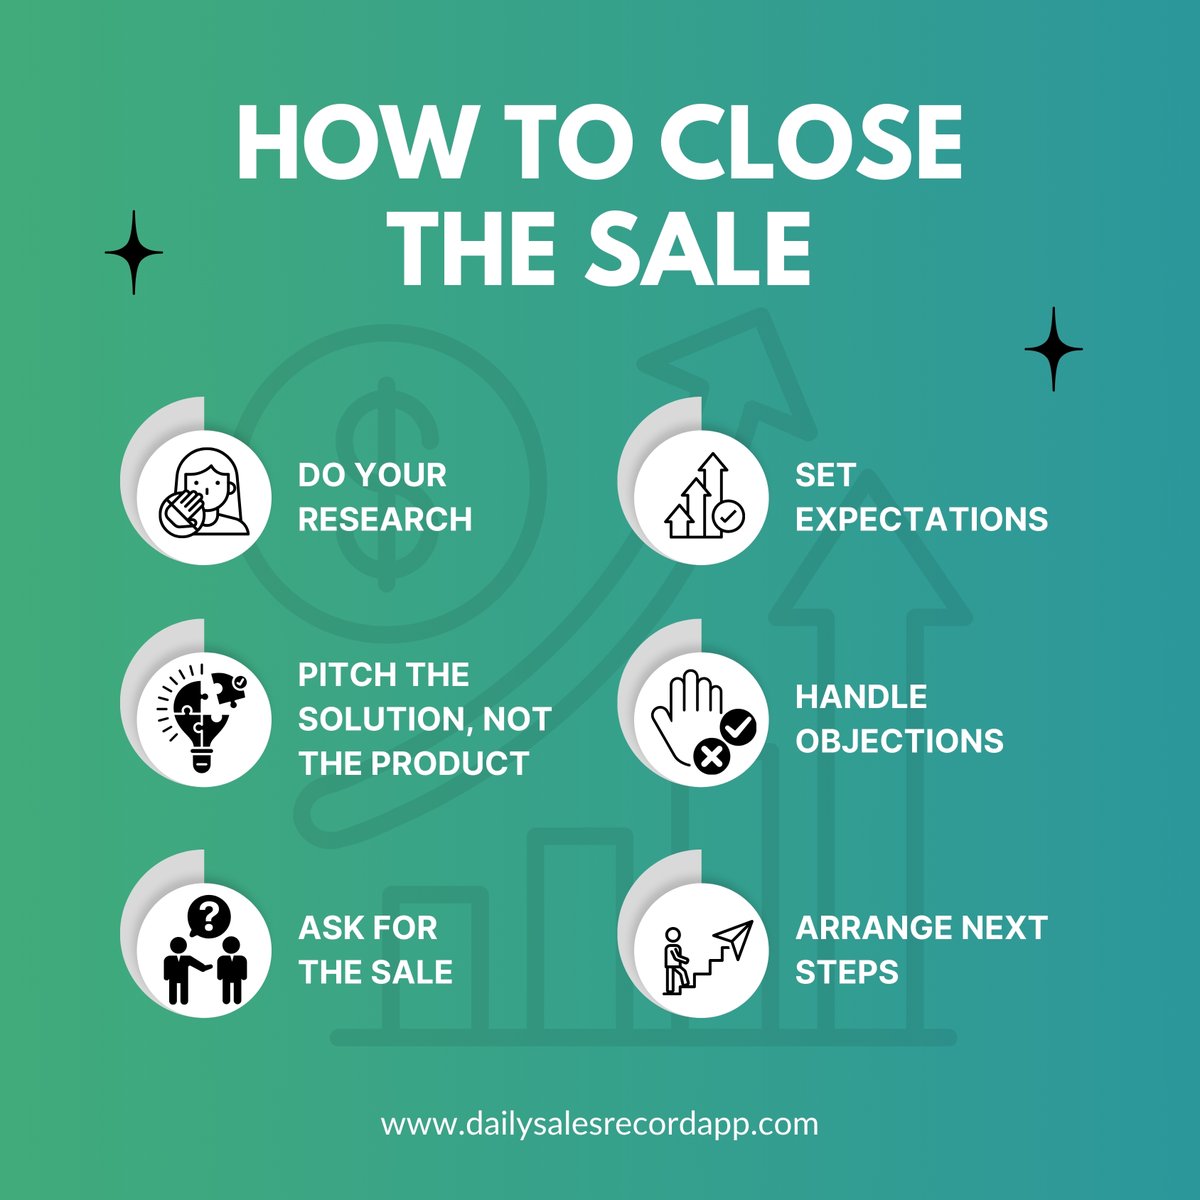 How to Close The Sale

Do your research and become A better seller 💰

#closingthesale
#salestips
#salessuccess
#salesstrategy
#salestraining
#salesskills
#salestechniques
#salesadvice
#selllikeapro
#salesmastery
#closingskills
#salesprofessionals
#salesdevelopment
#salescoaching